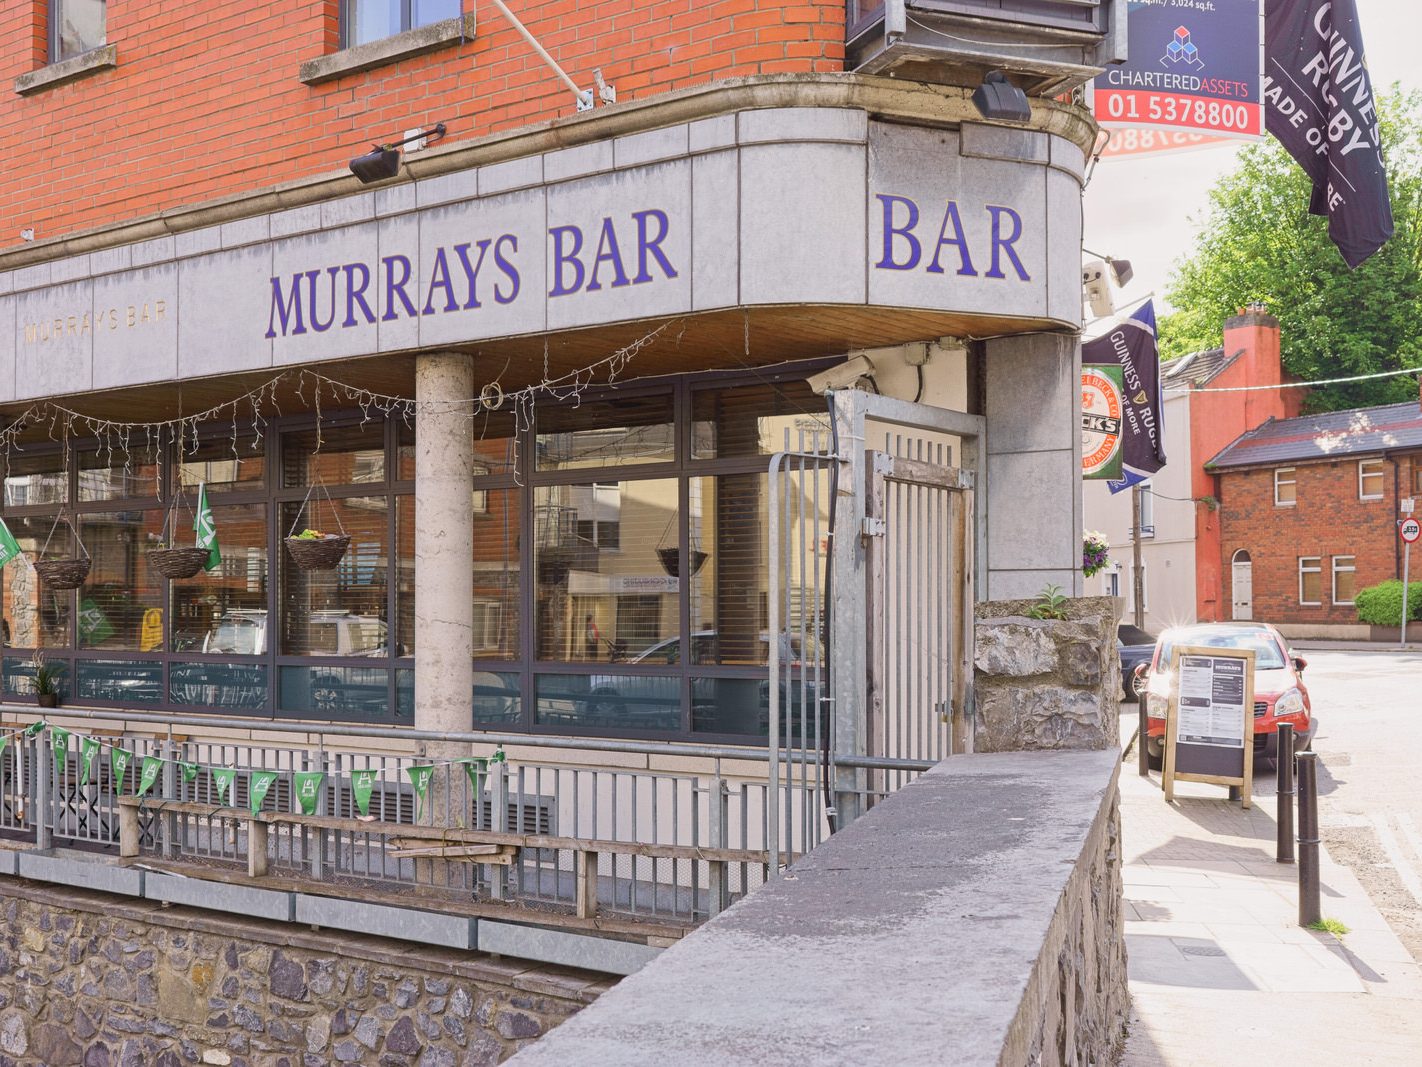 MURRAY's BAR BOW BRIDGE PLACE AS IT WAS IN 2016 [HAS SINCE BEEN SOLD]-227586-1